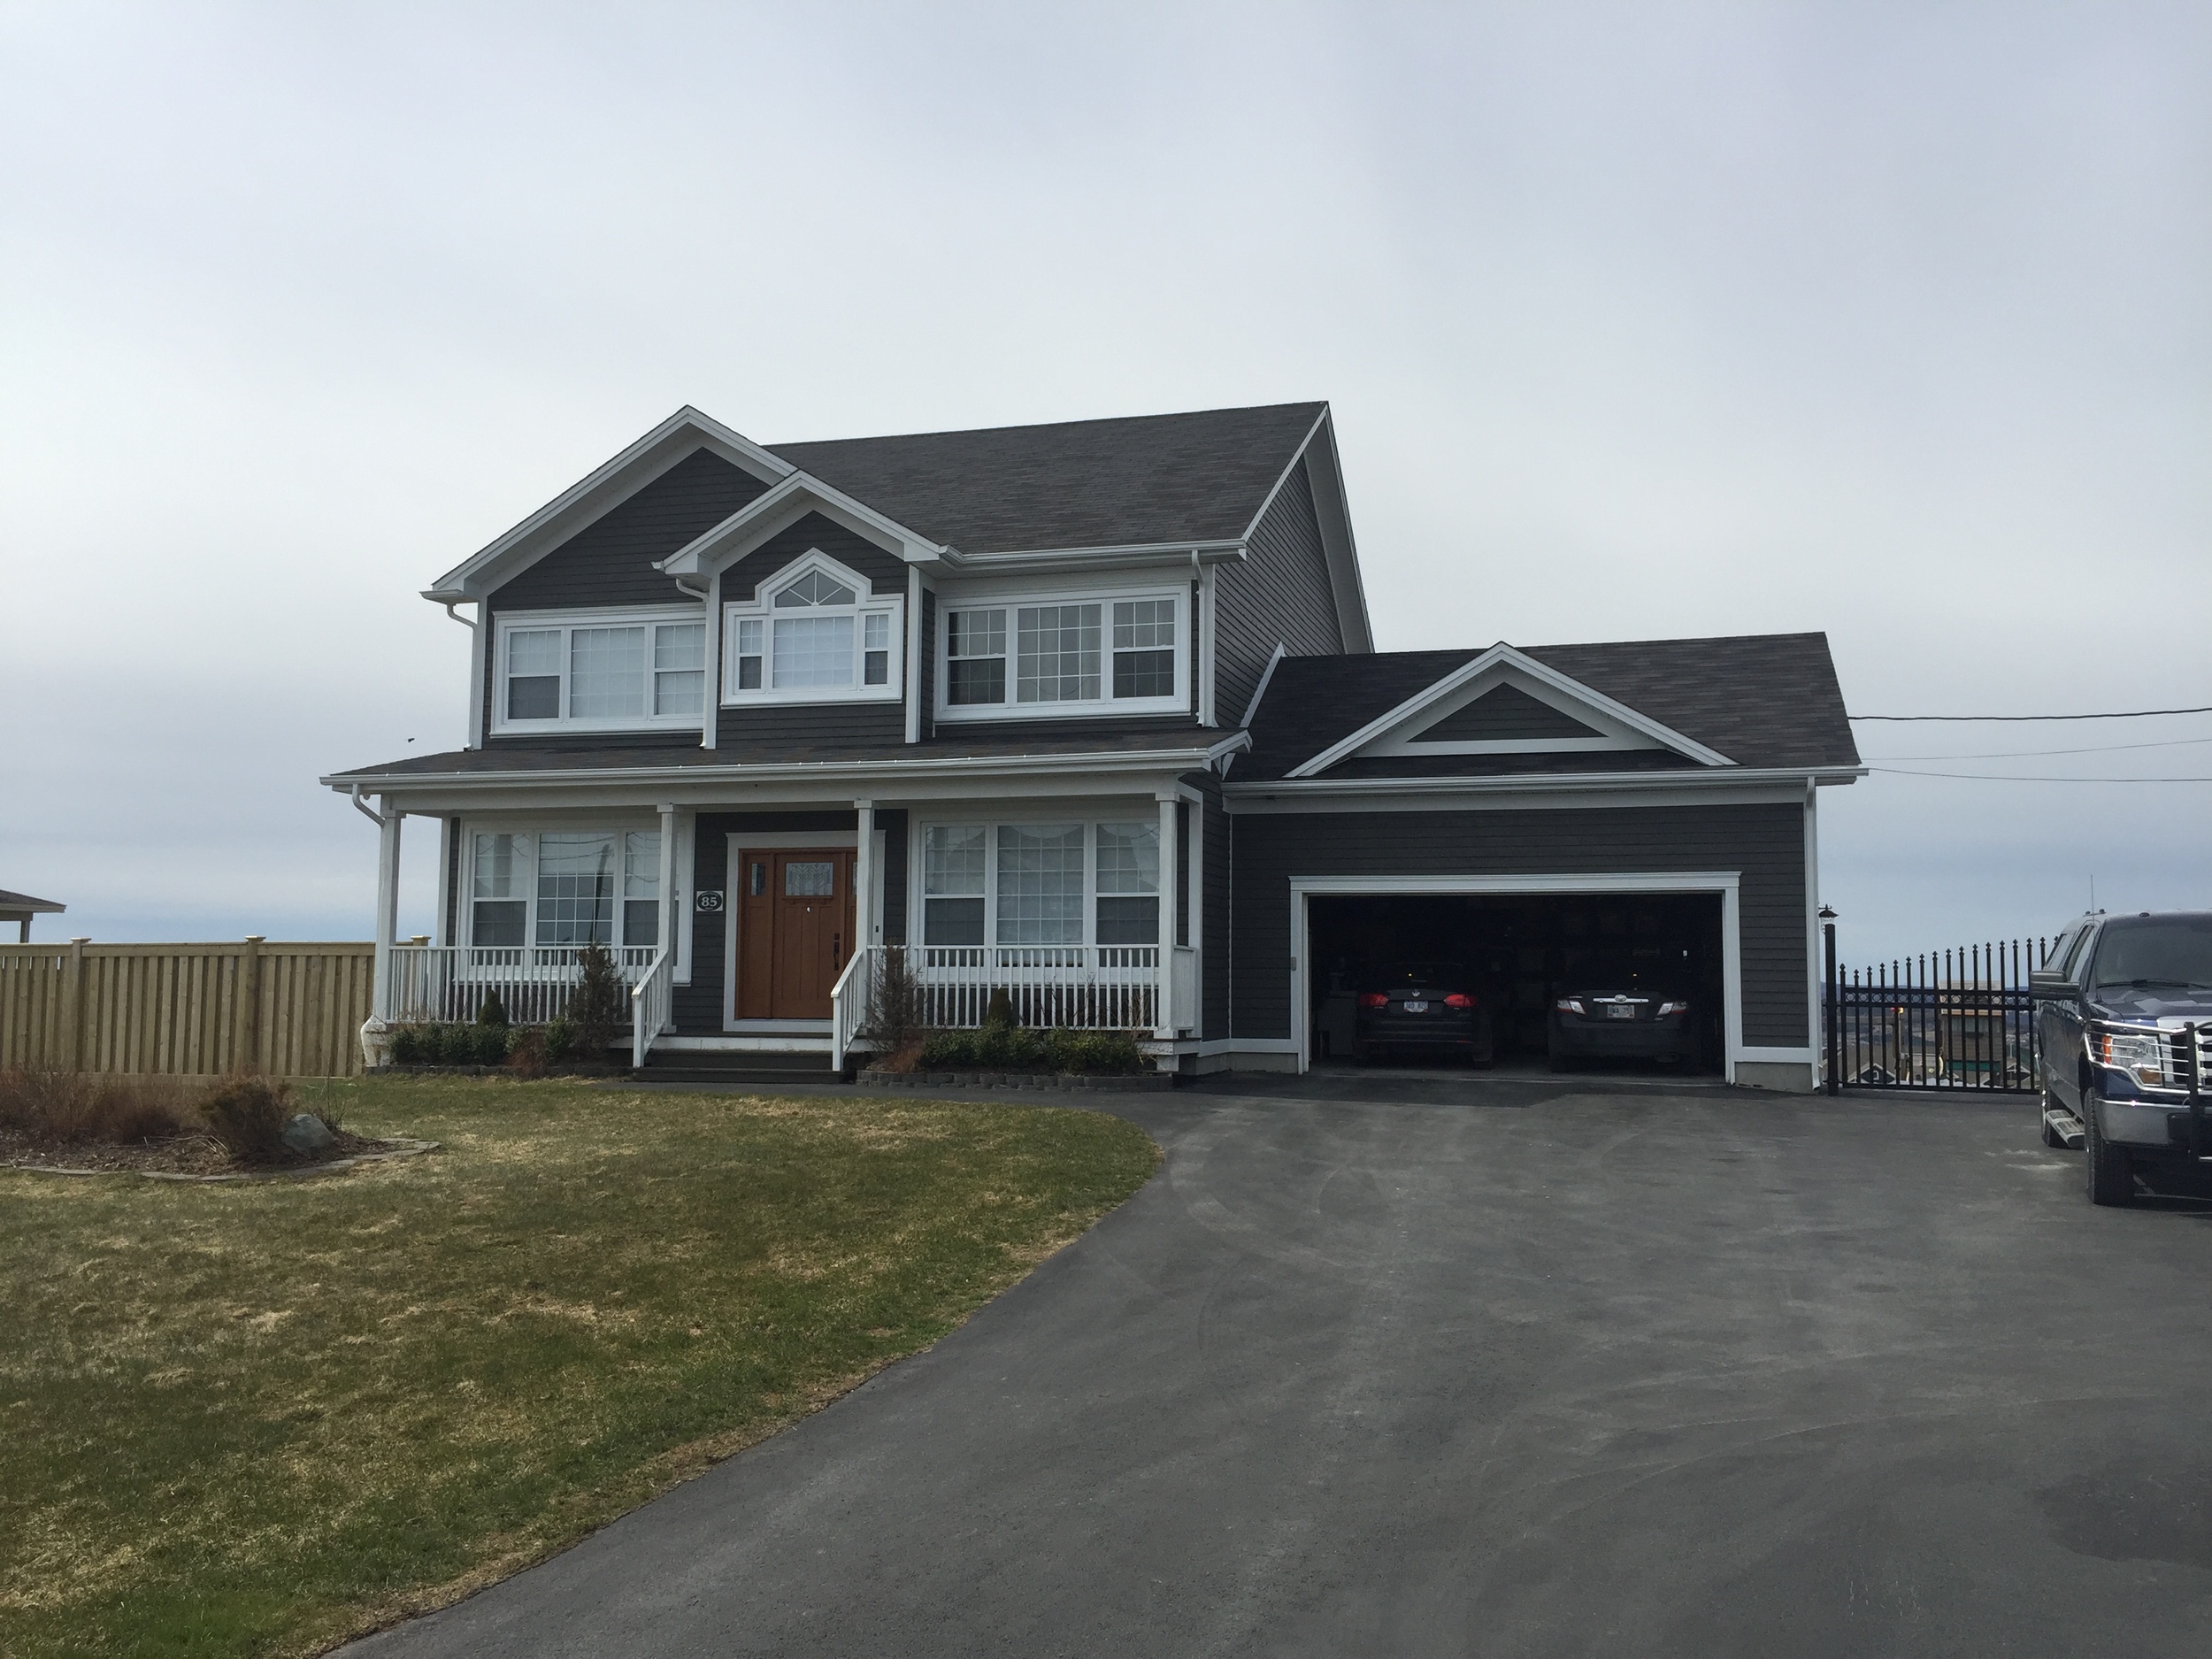 Complete exterior renovation with vinyl siding and trims replaced with Cape Cod. 